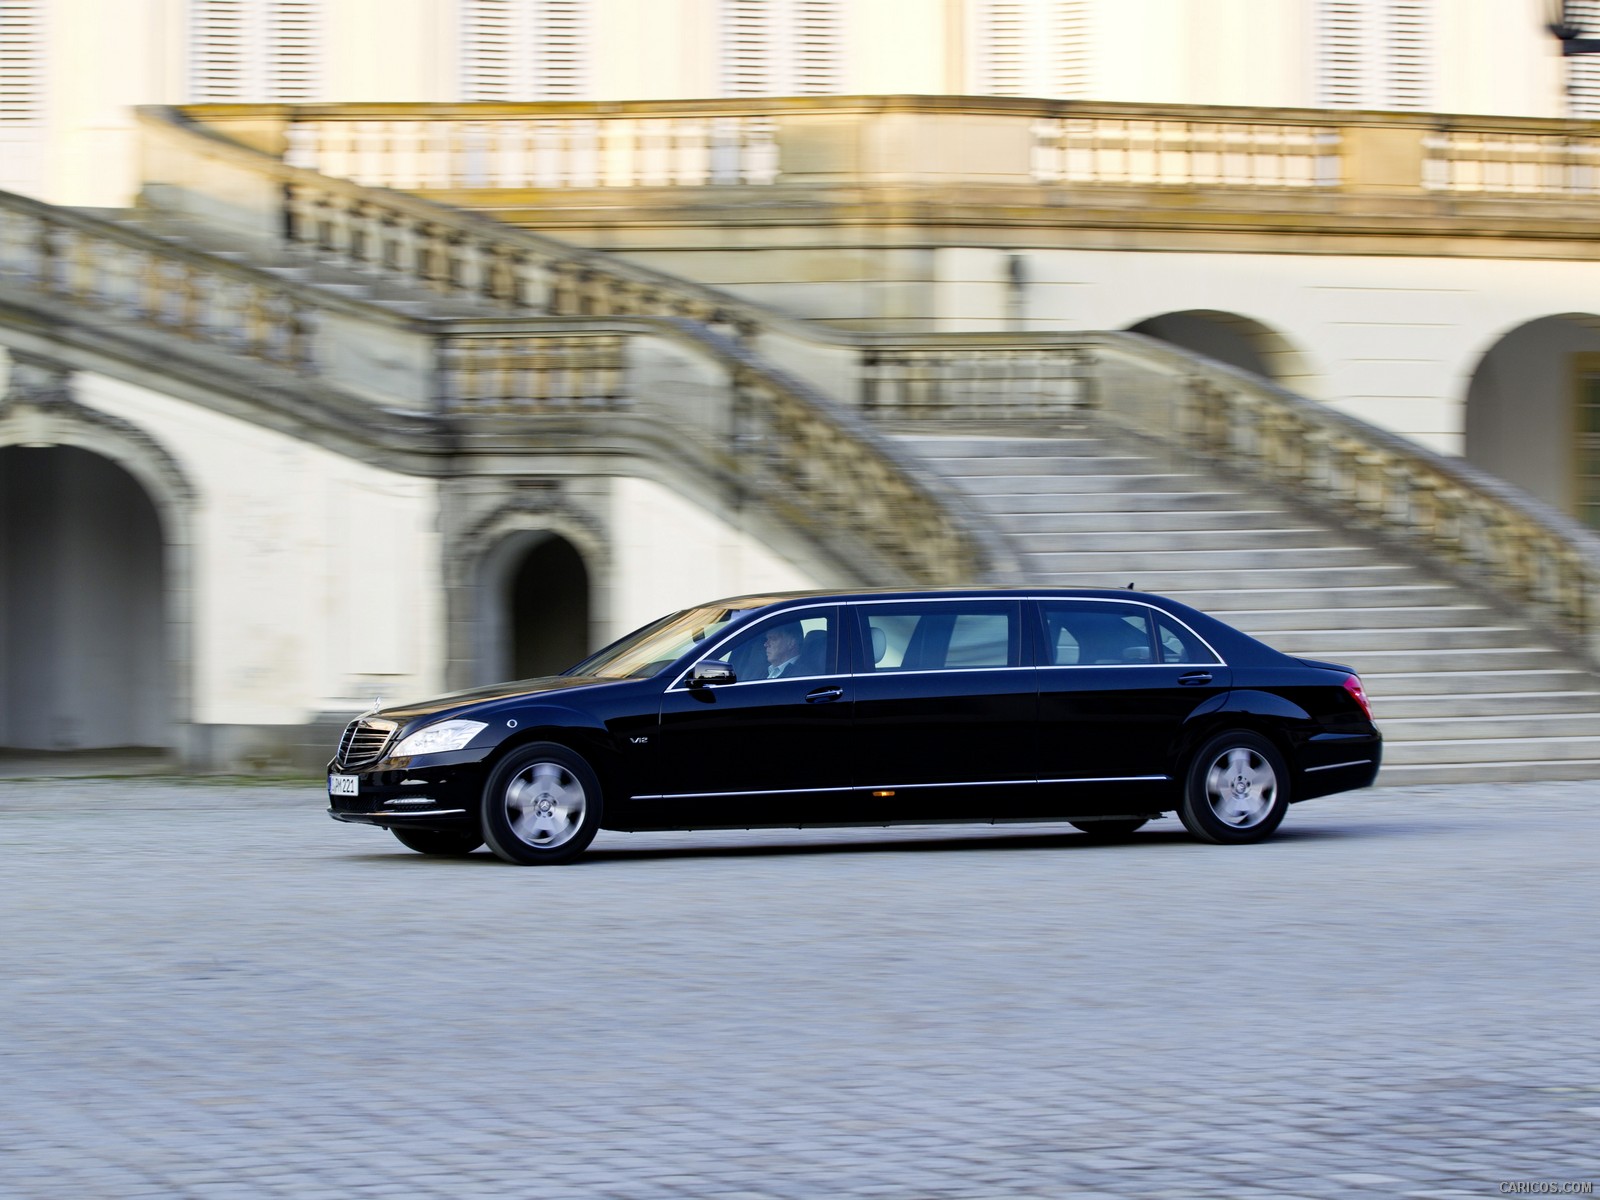 Mercedes-Benz S600 Pullman Guard  - Side, #16 of 24